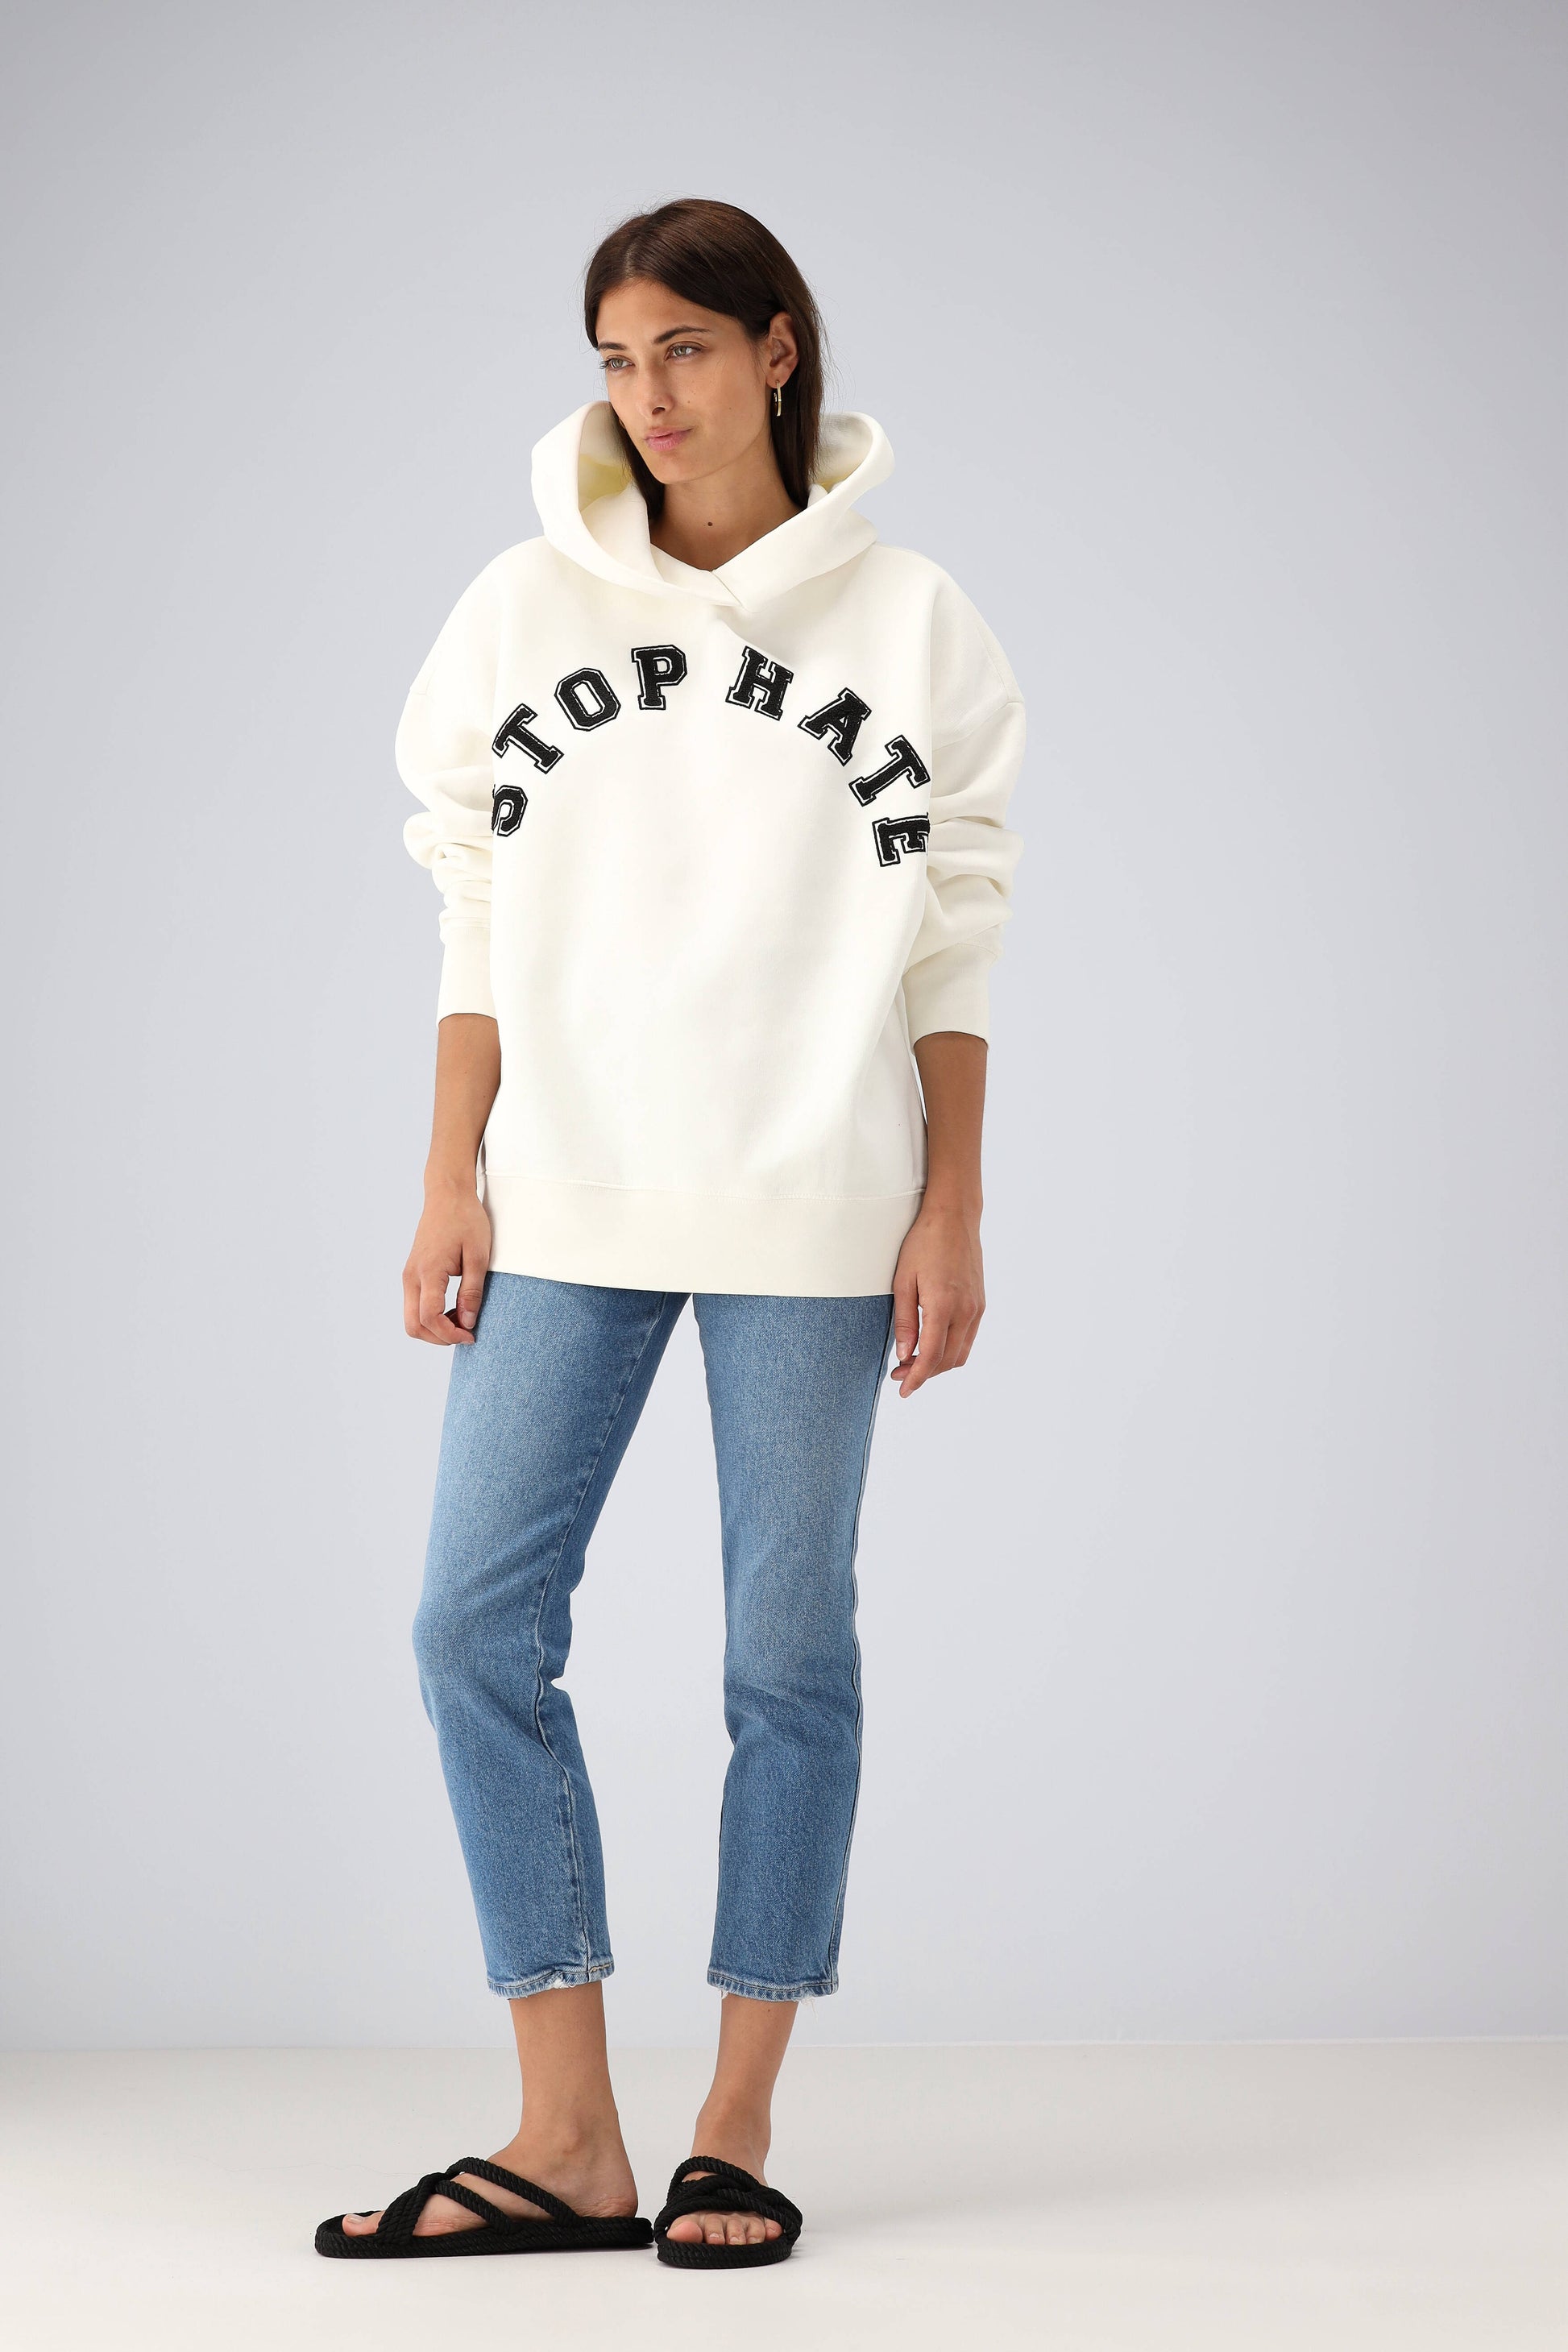 Hoodie Stop Hate in IvoryClosed - Anita Hass